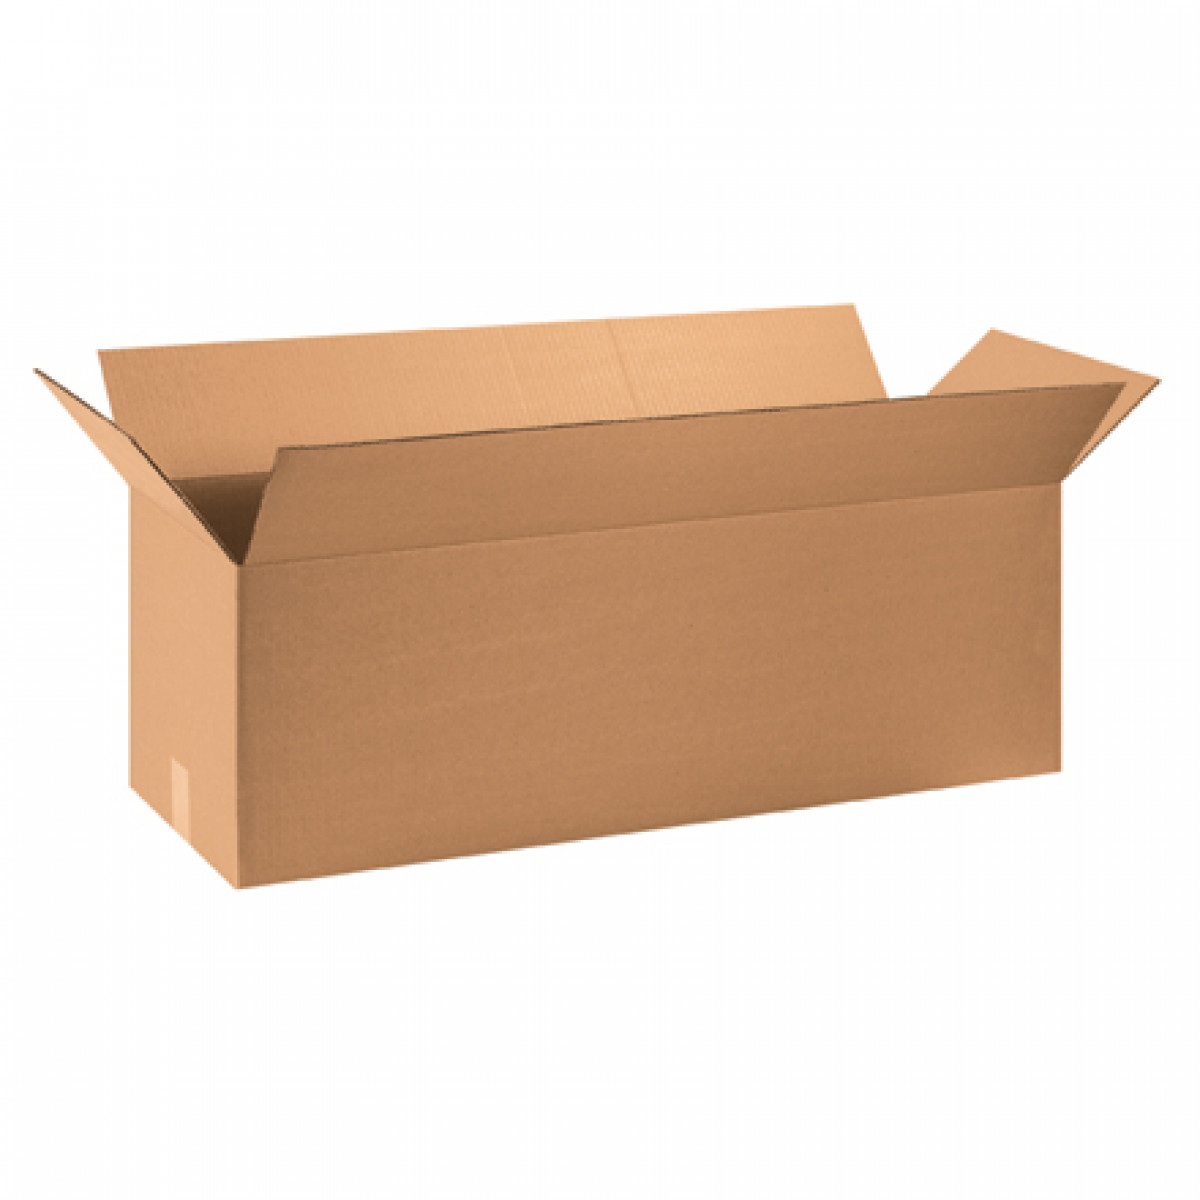 36" x 12" x 12" Long Corrugated Boxes 20ct